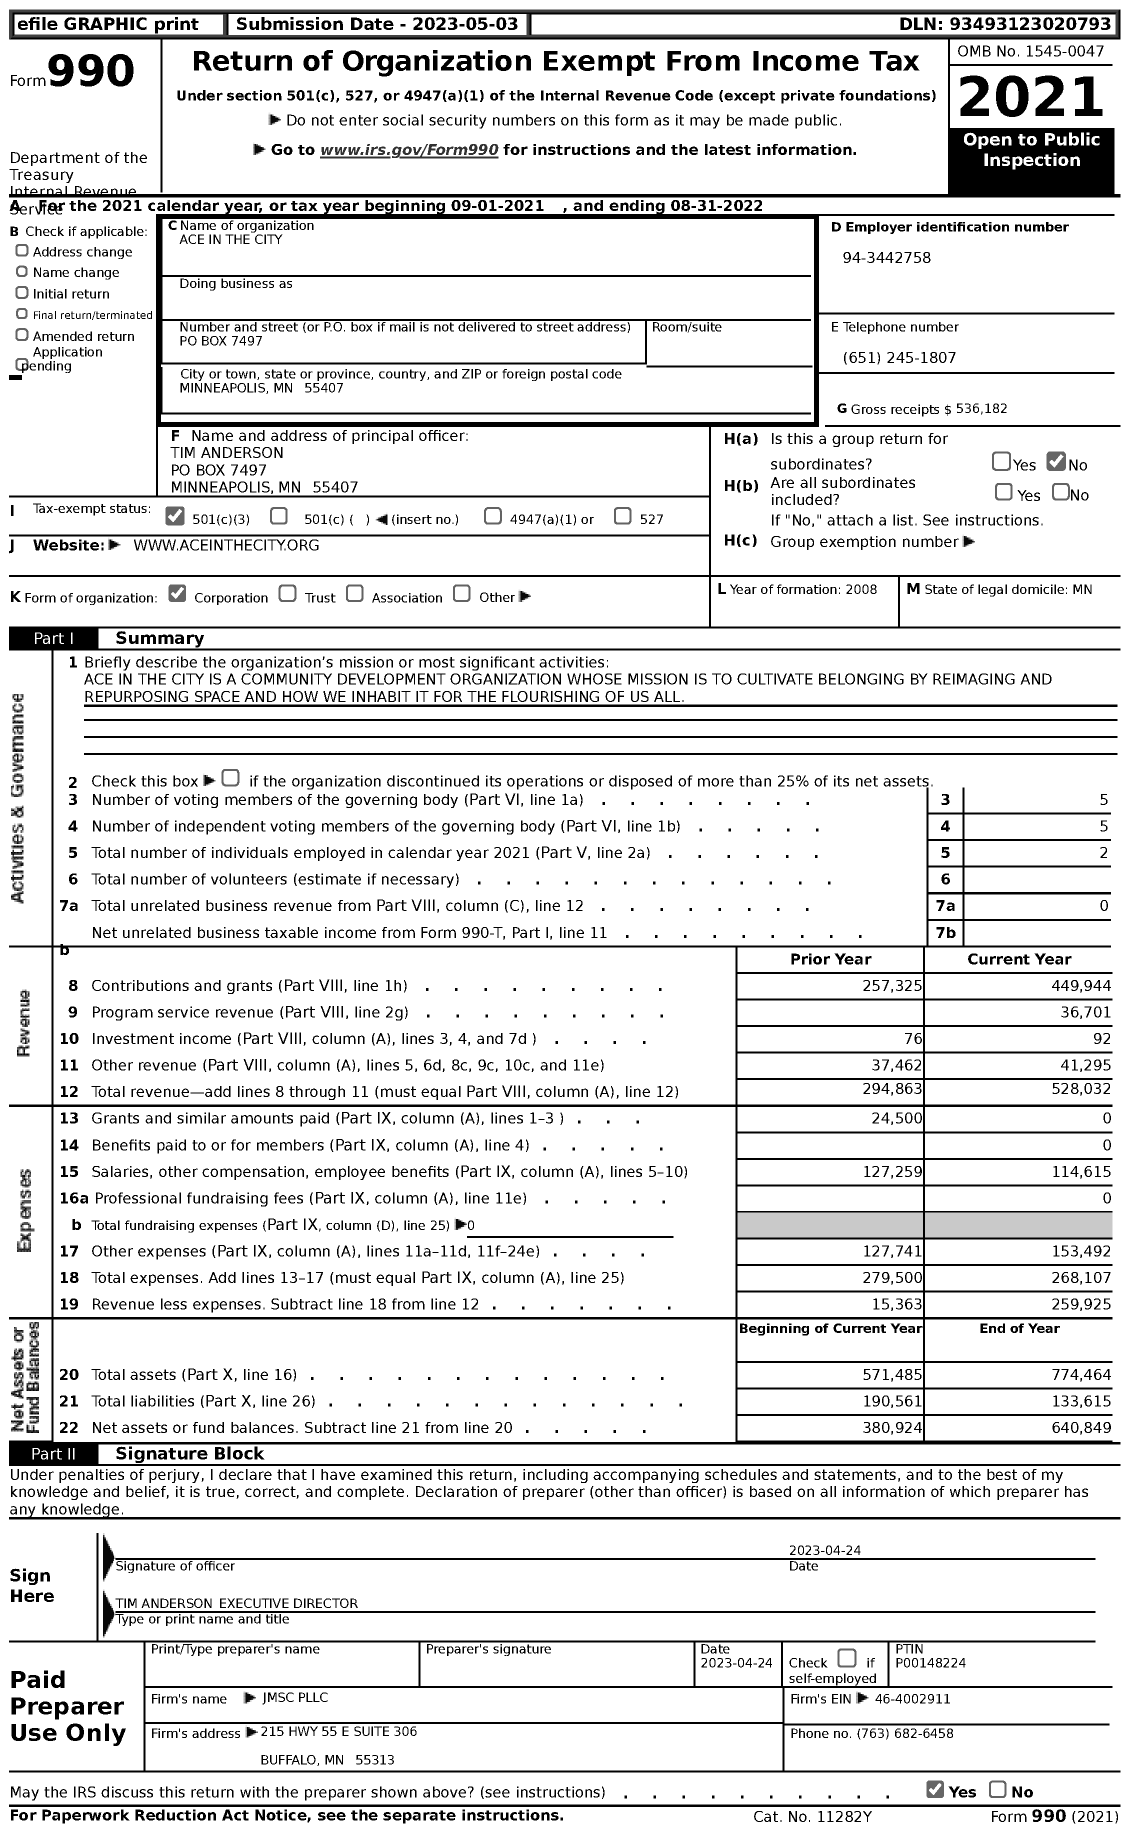 Image of first page of 2021 Form 990 for Ace in the City